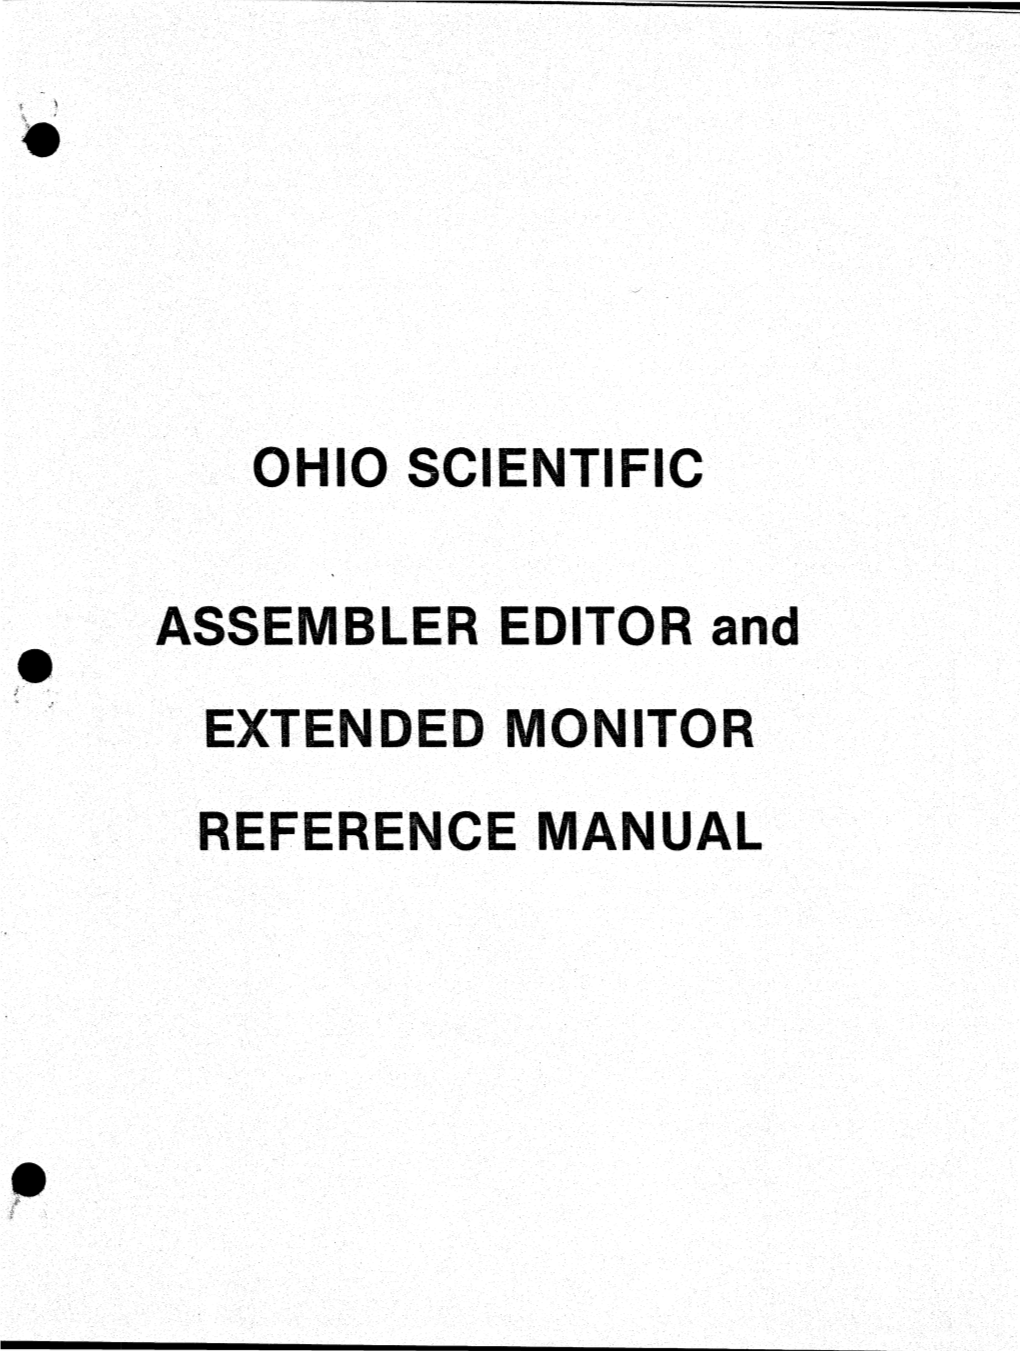 OHIO SCIENTIFIC ASSEMBLER EDITOR and EXTENDED